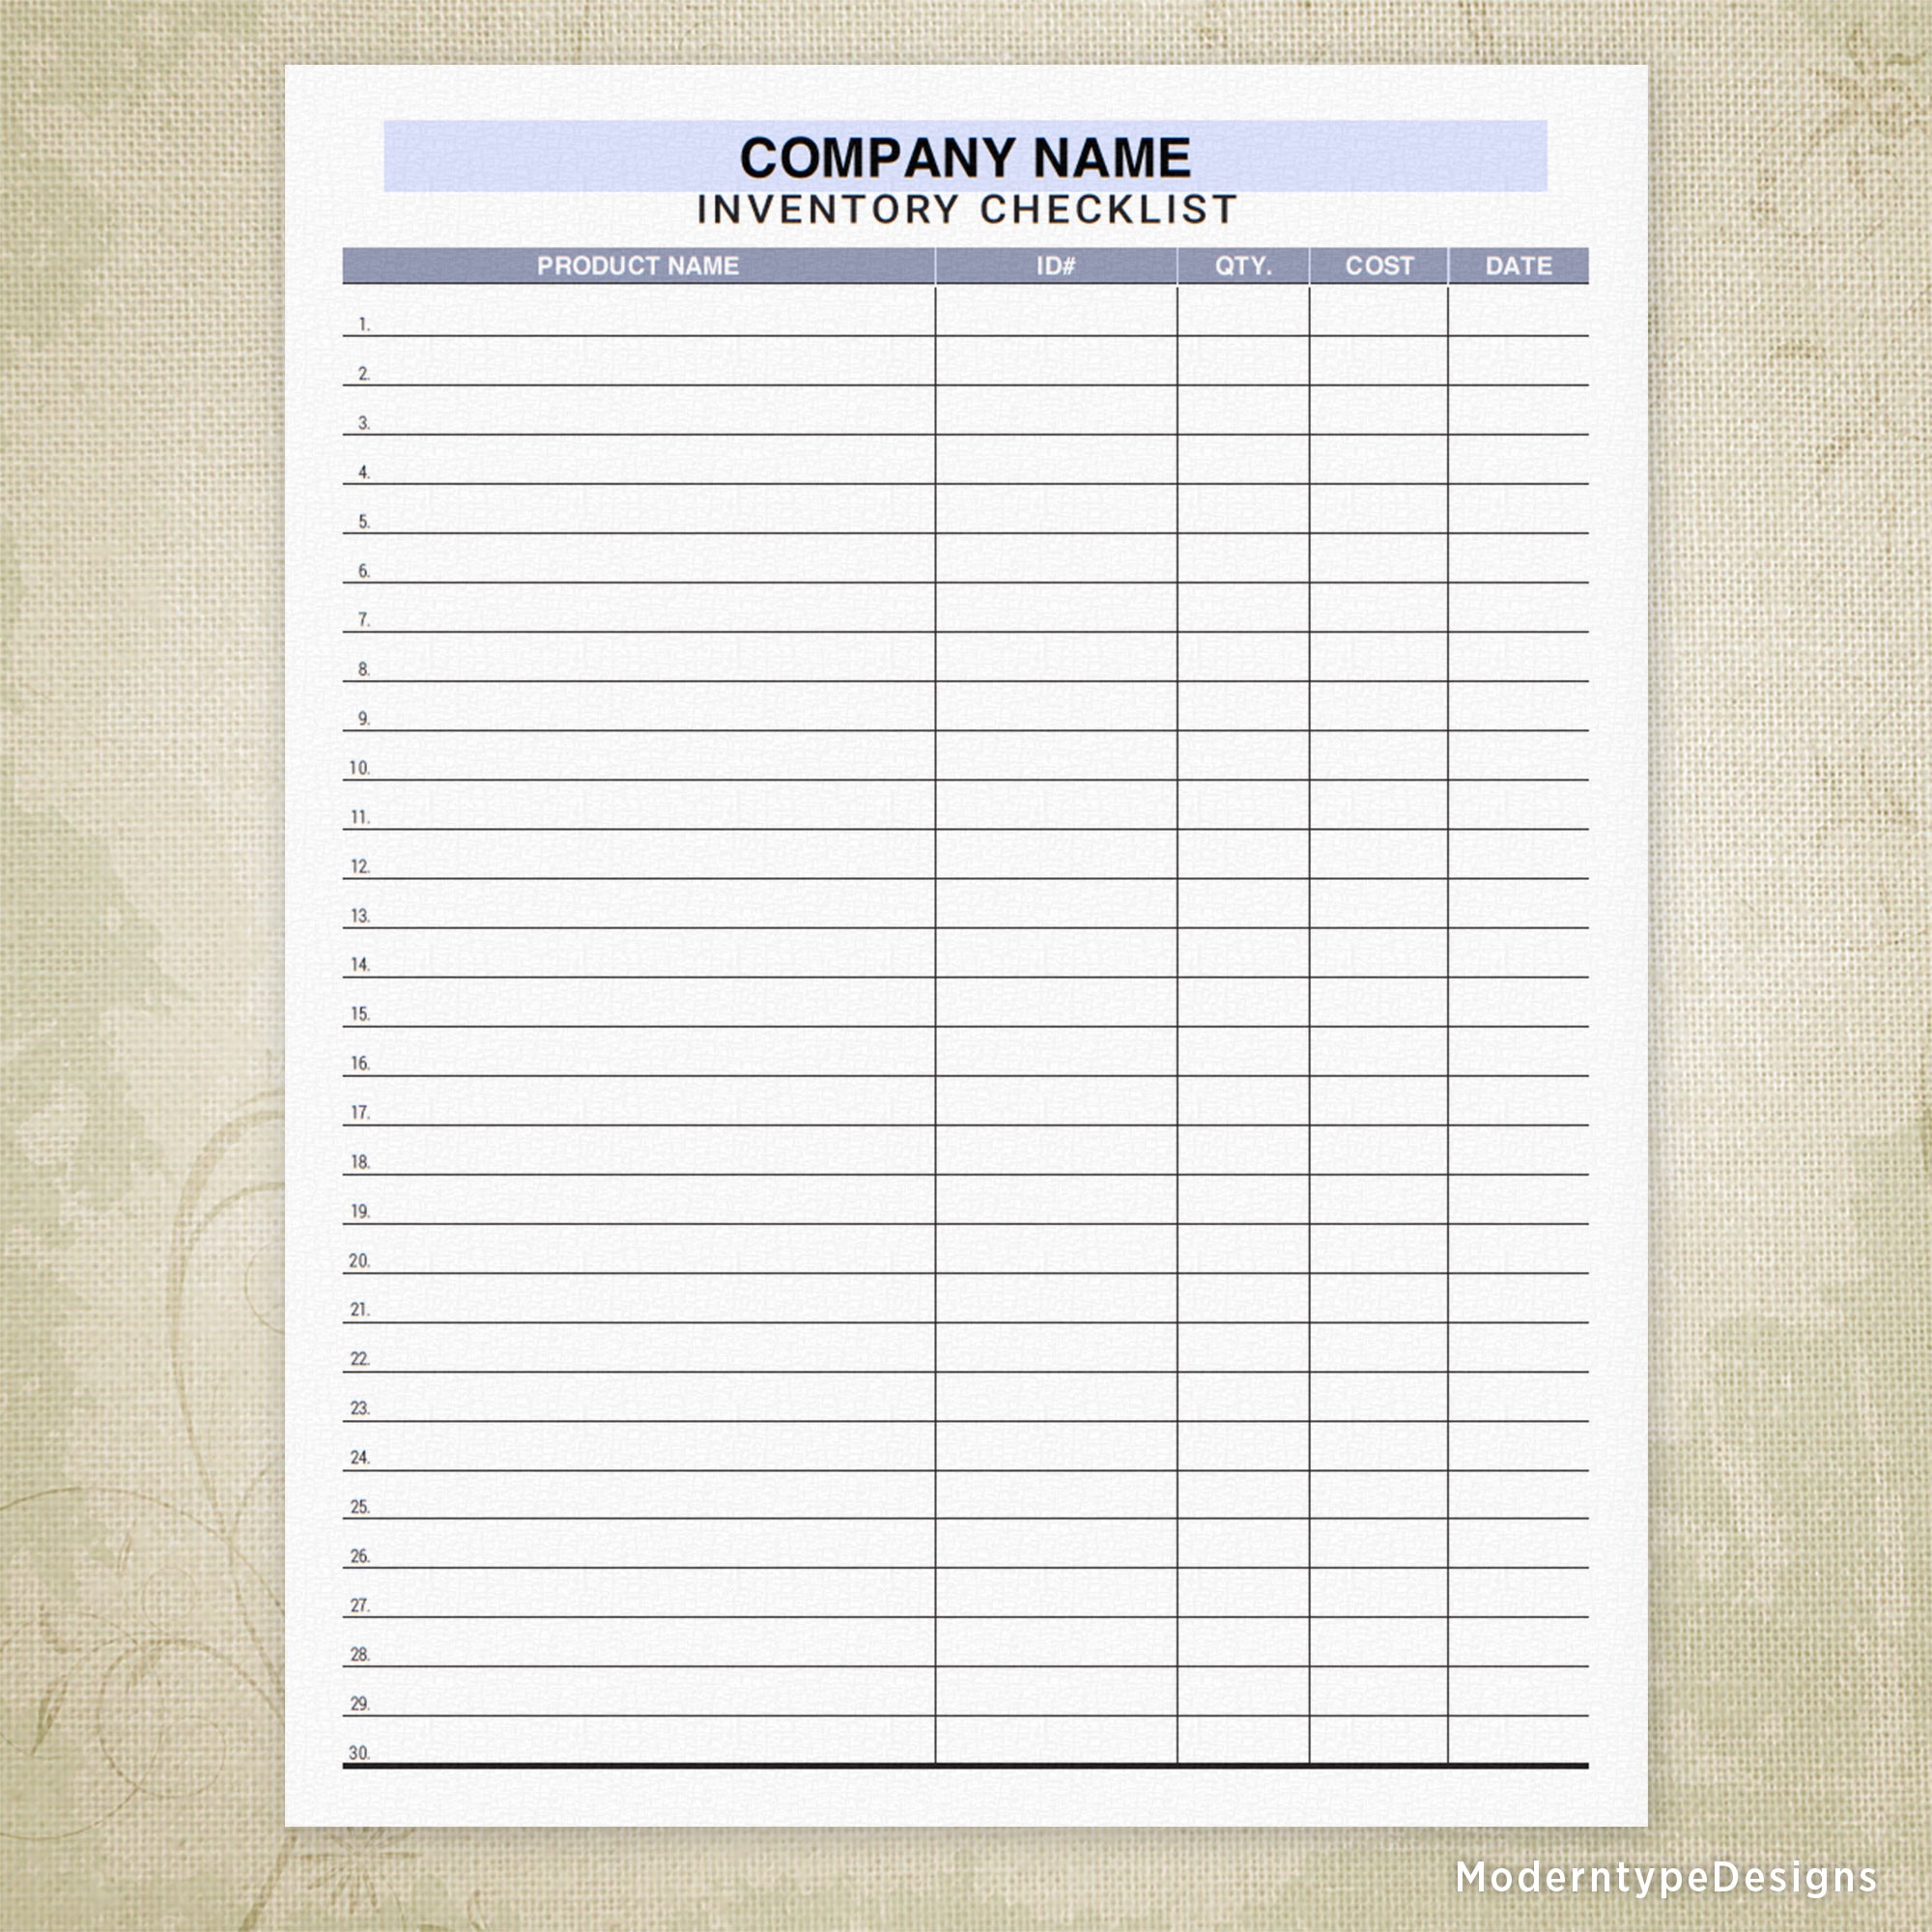 Inventory Checklist Tracker Printable, Personalized